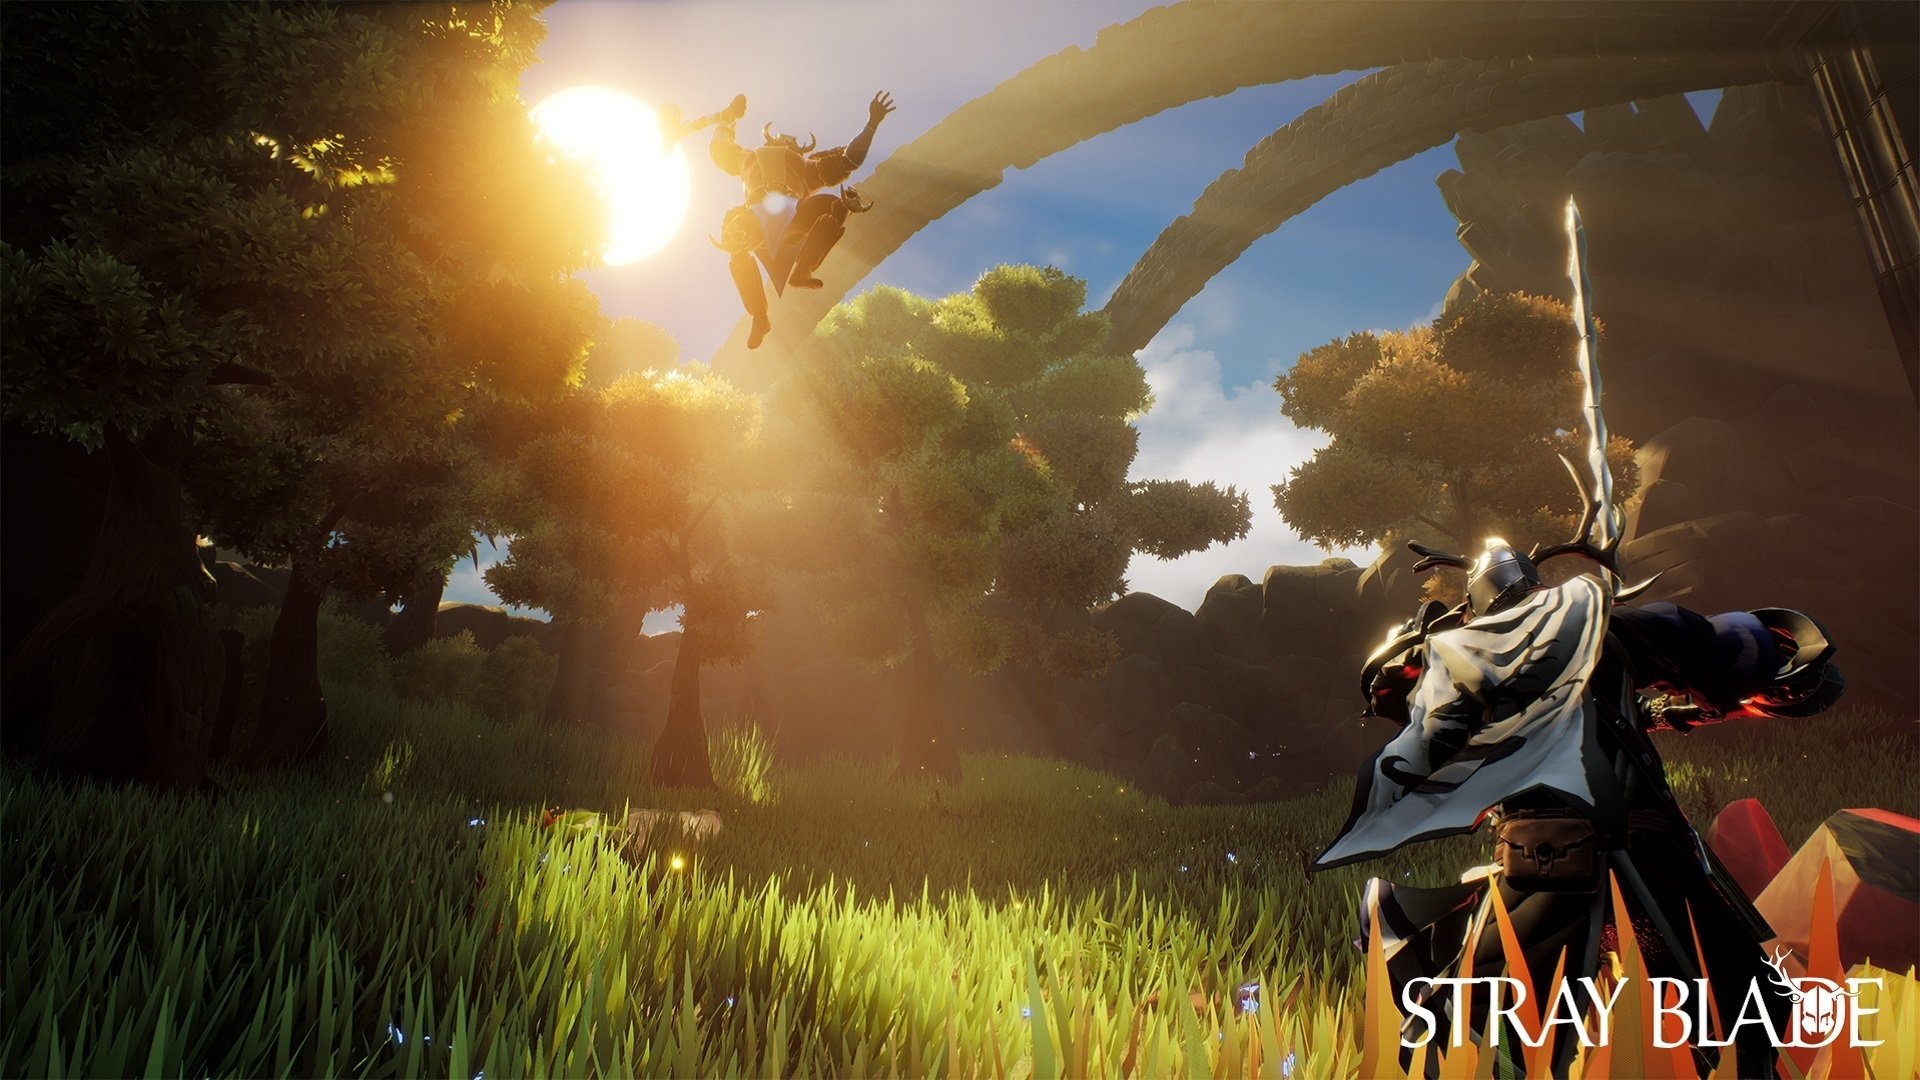 download Stray Blade